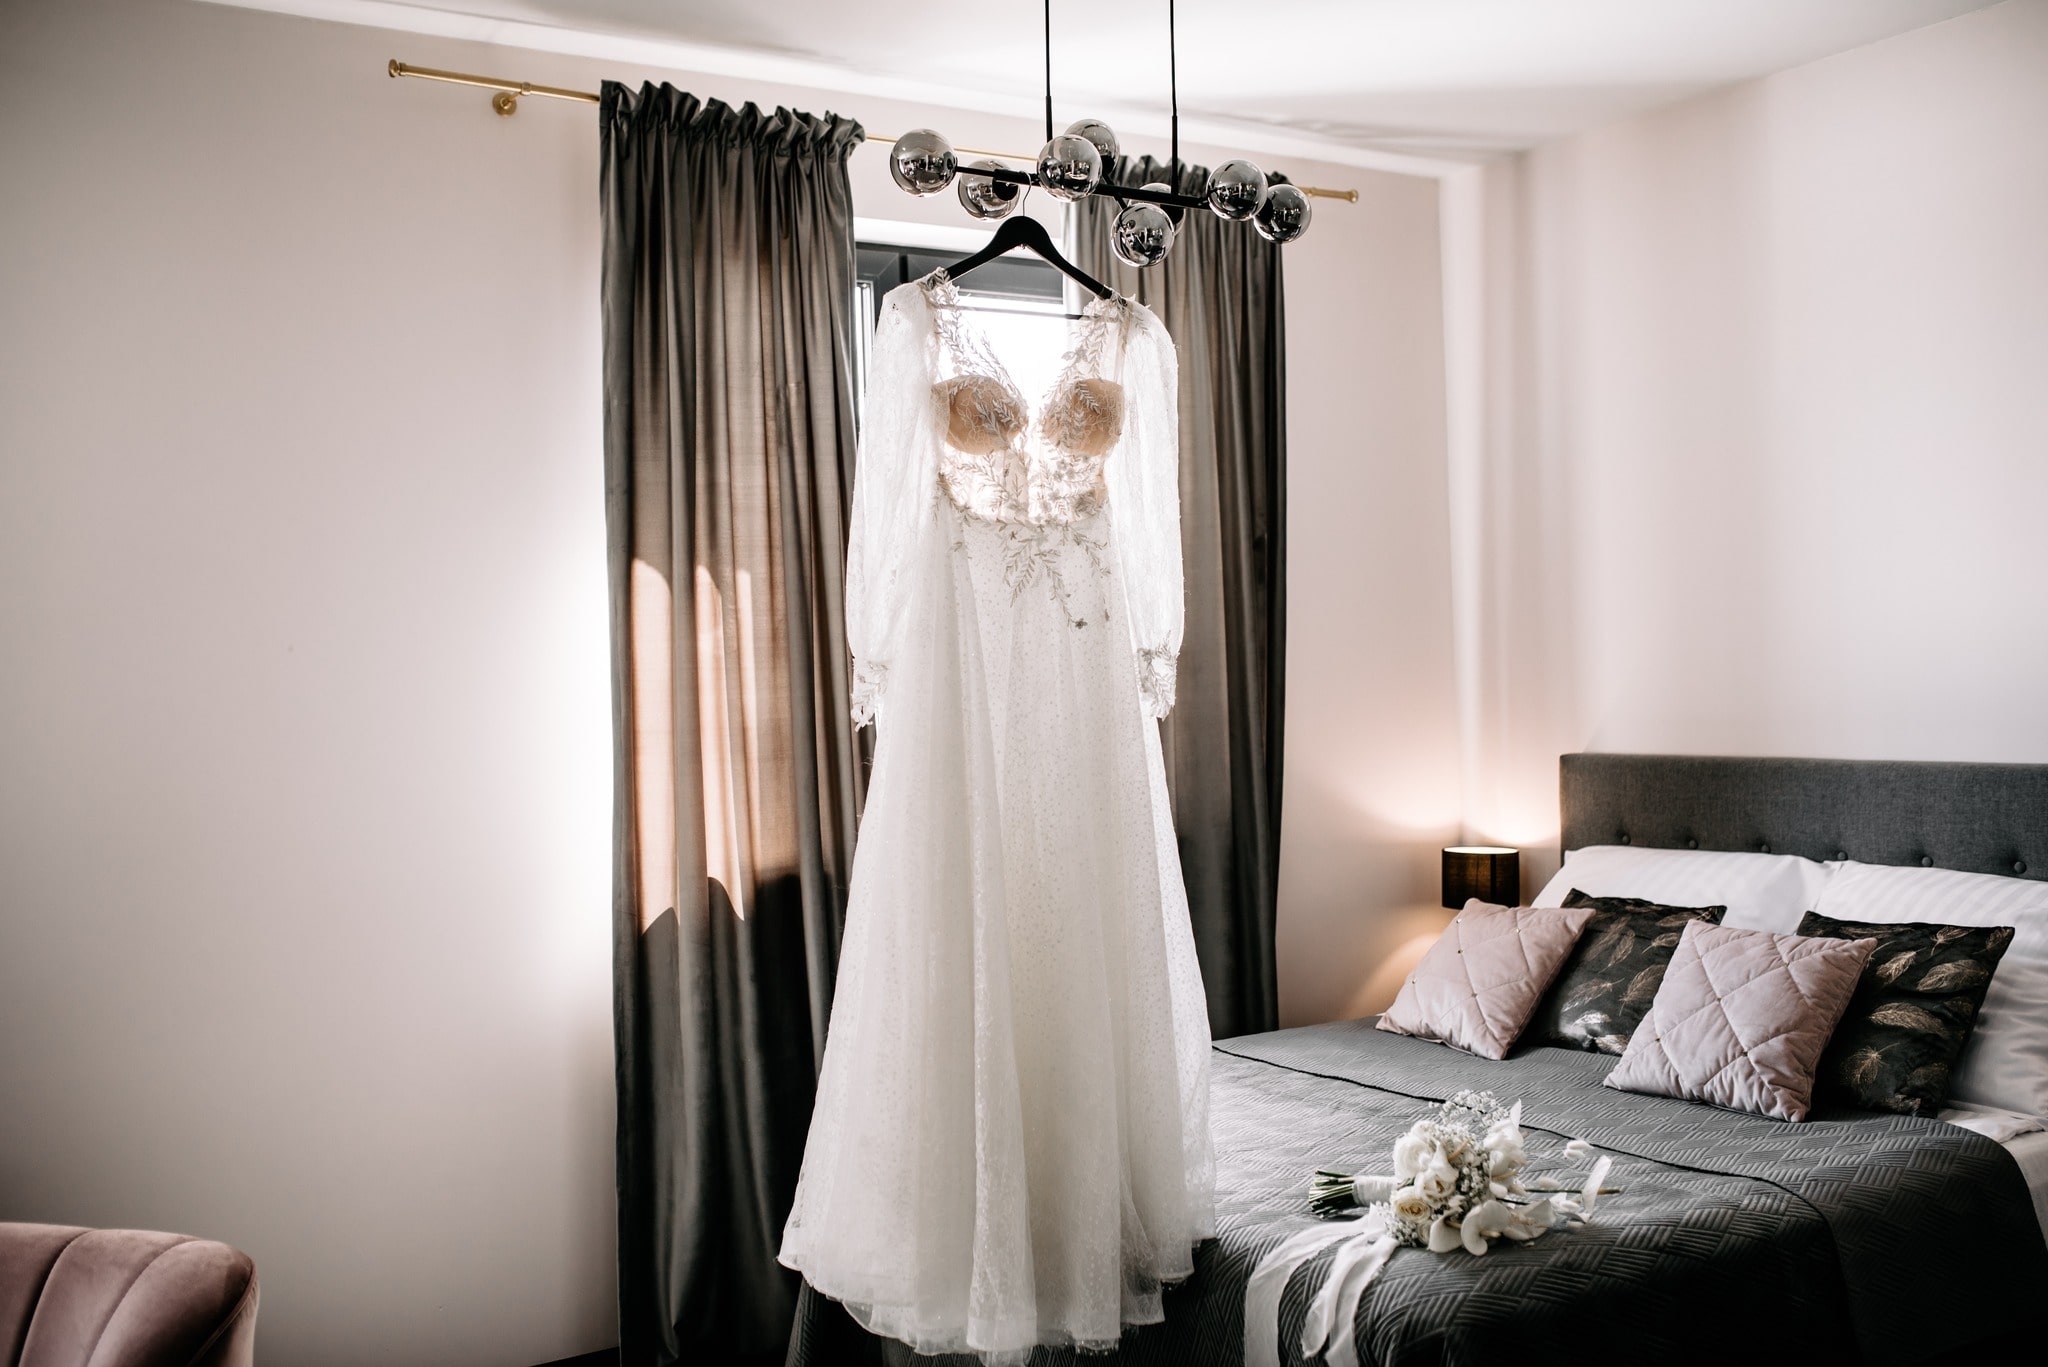 A wedding dress hanging in the hotel room